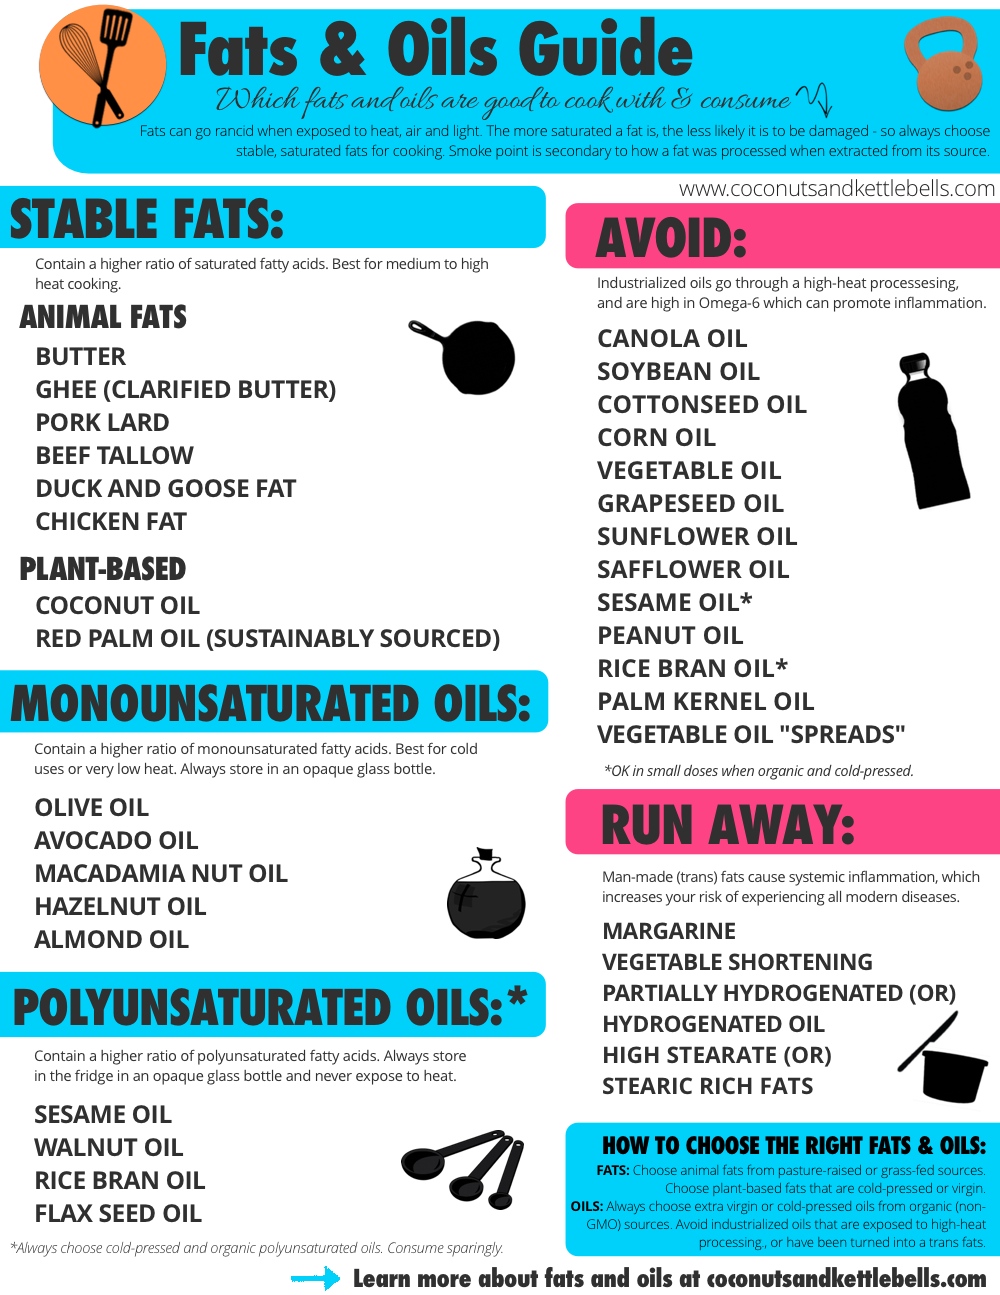 the complete guide to fats (plus, a downloadable list!)